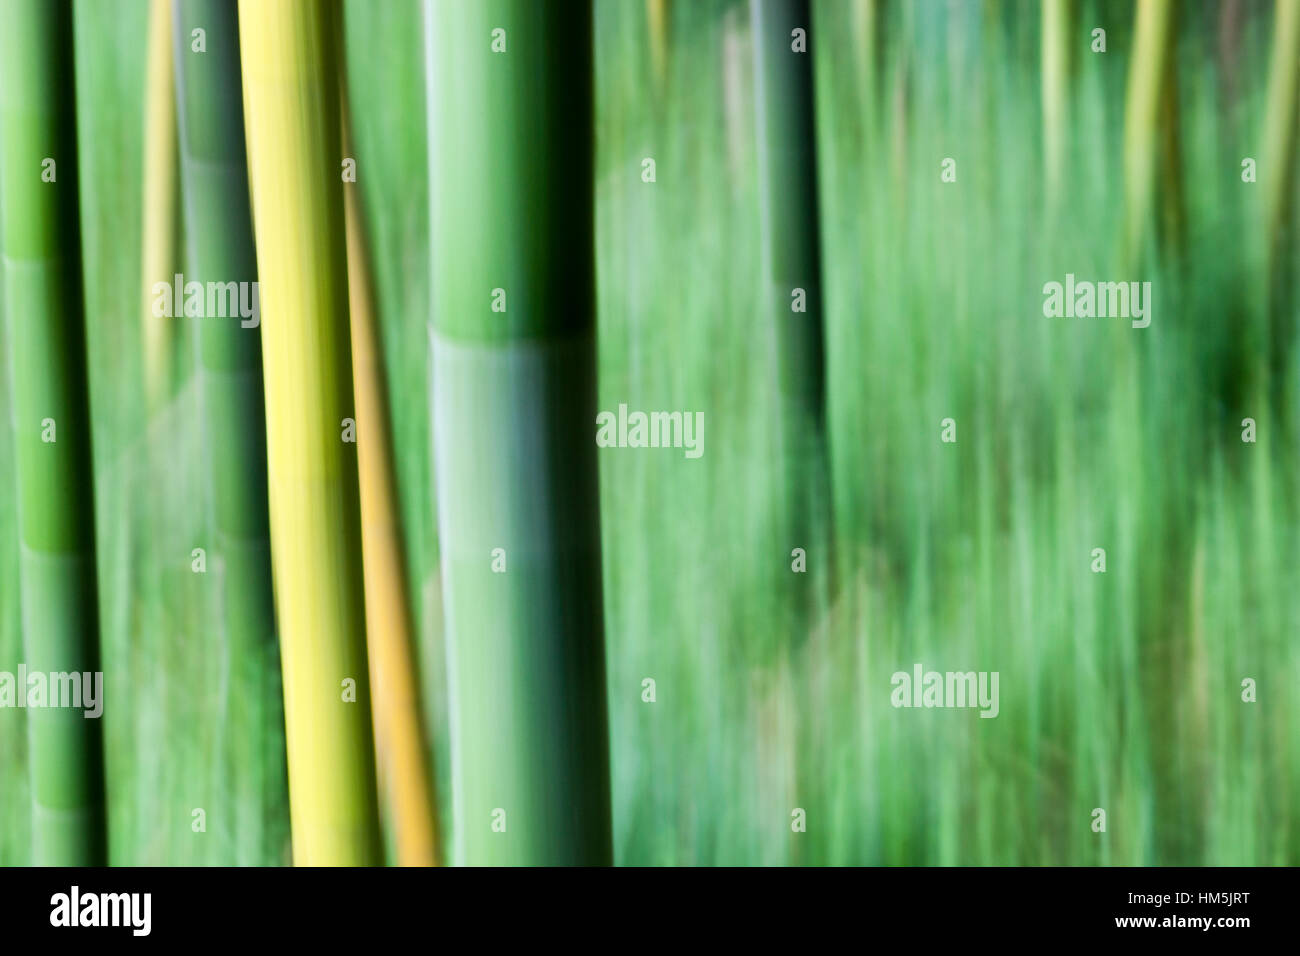 Abstract image of bamboo culms Stock Photo